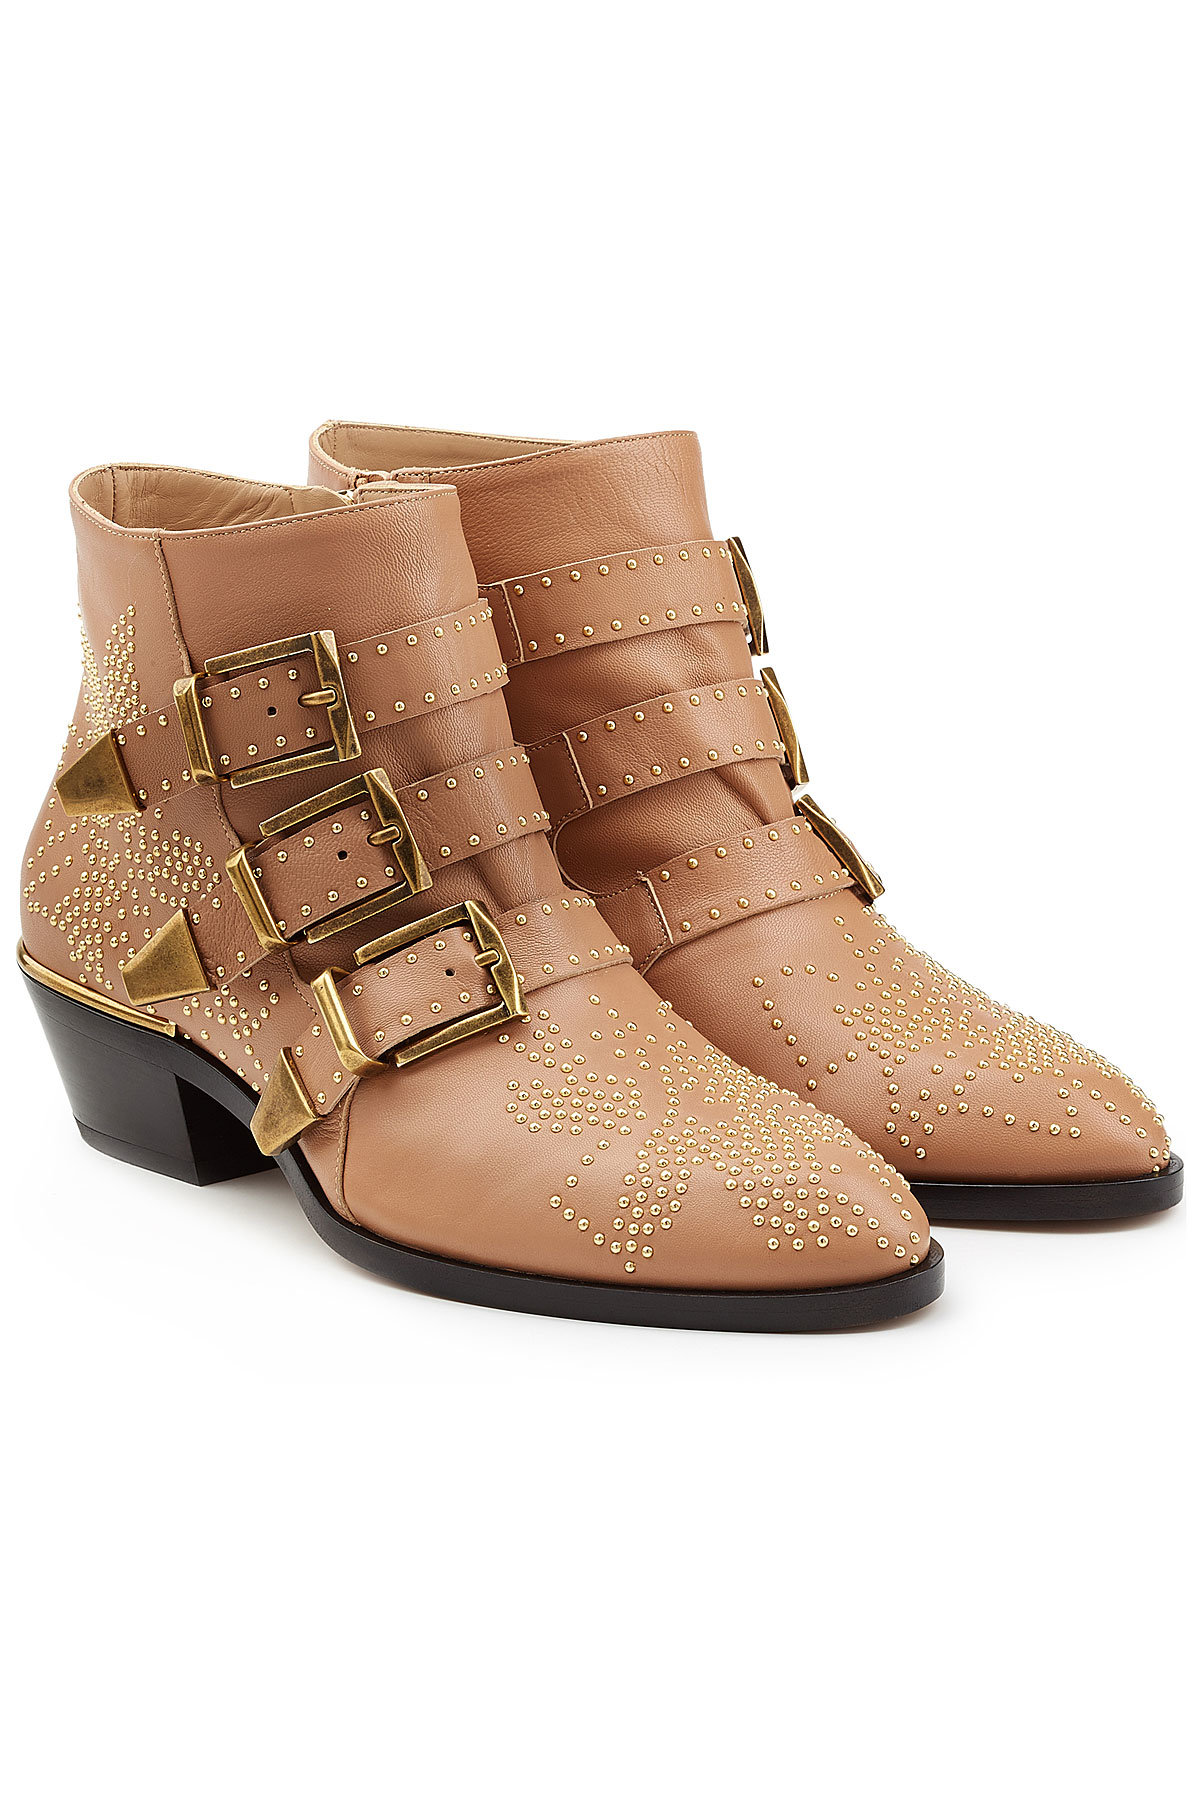 Chloe - Studded Ankle Boots